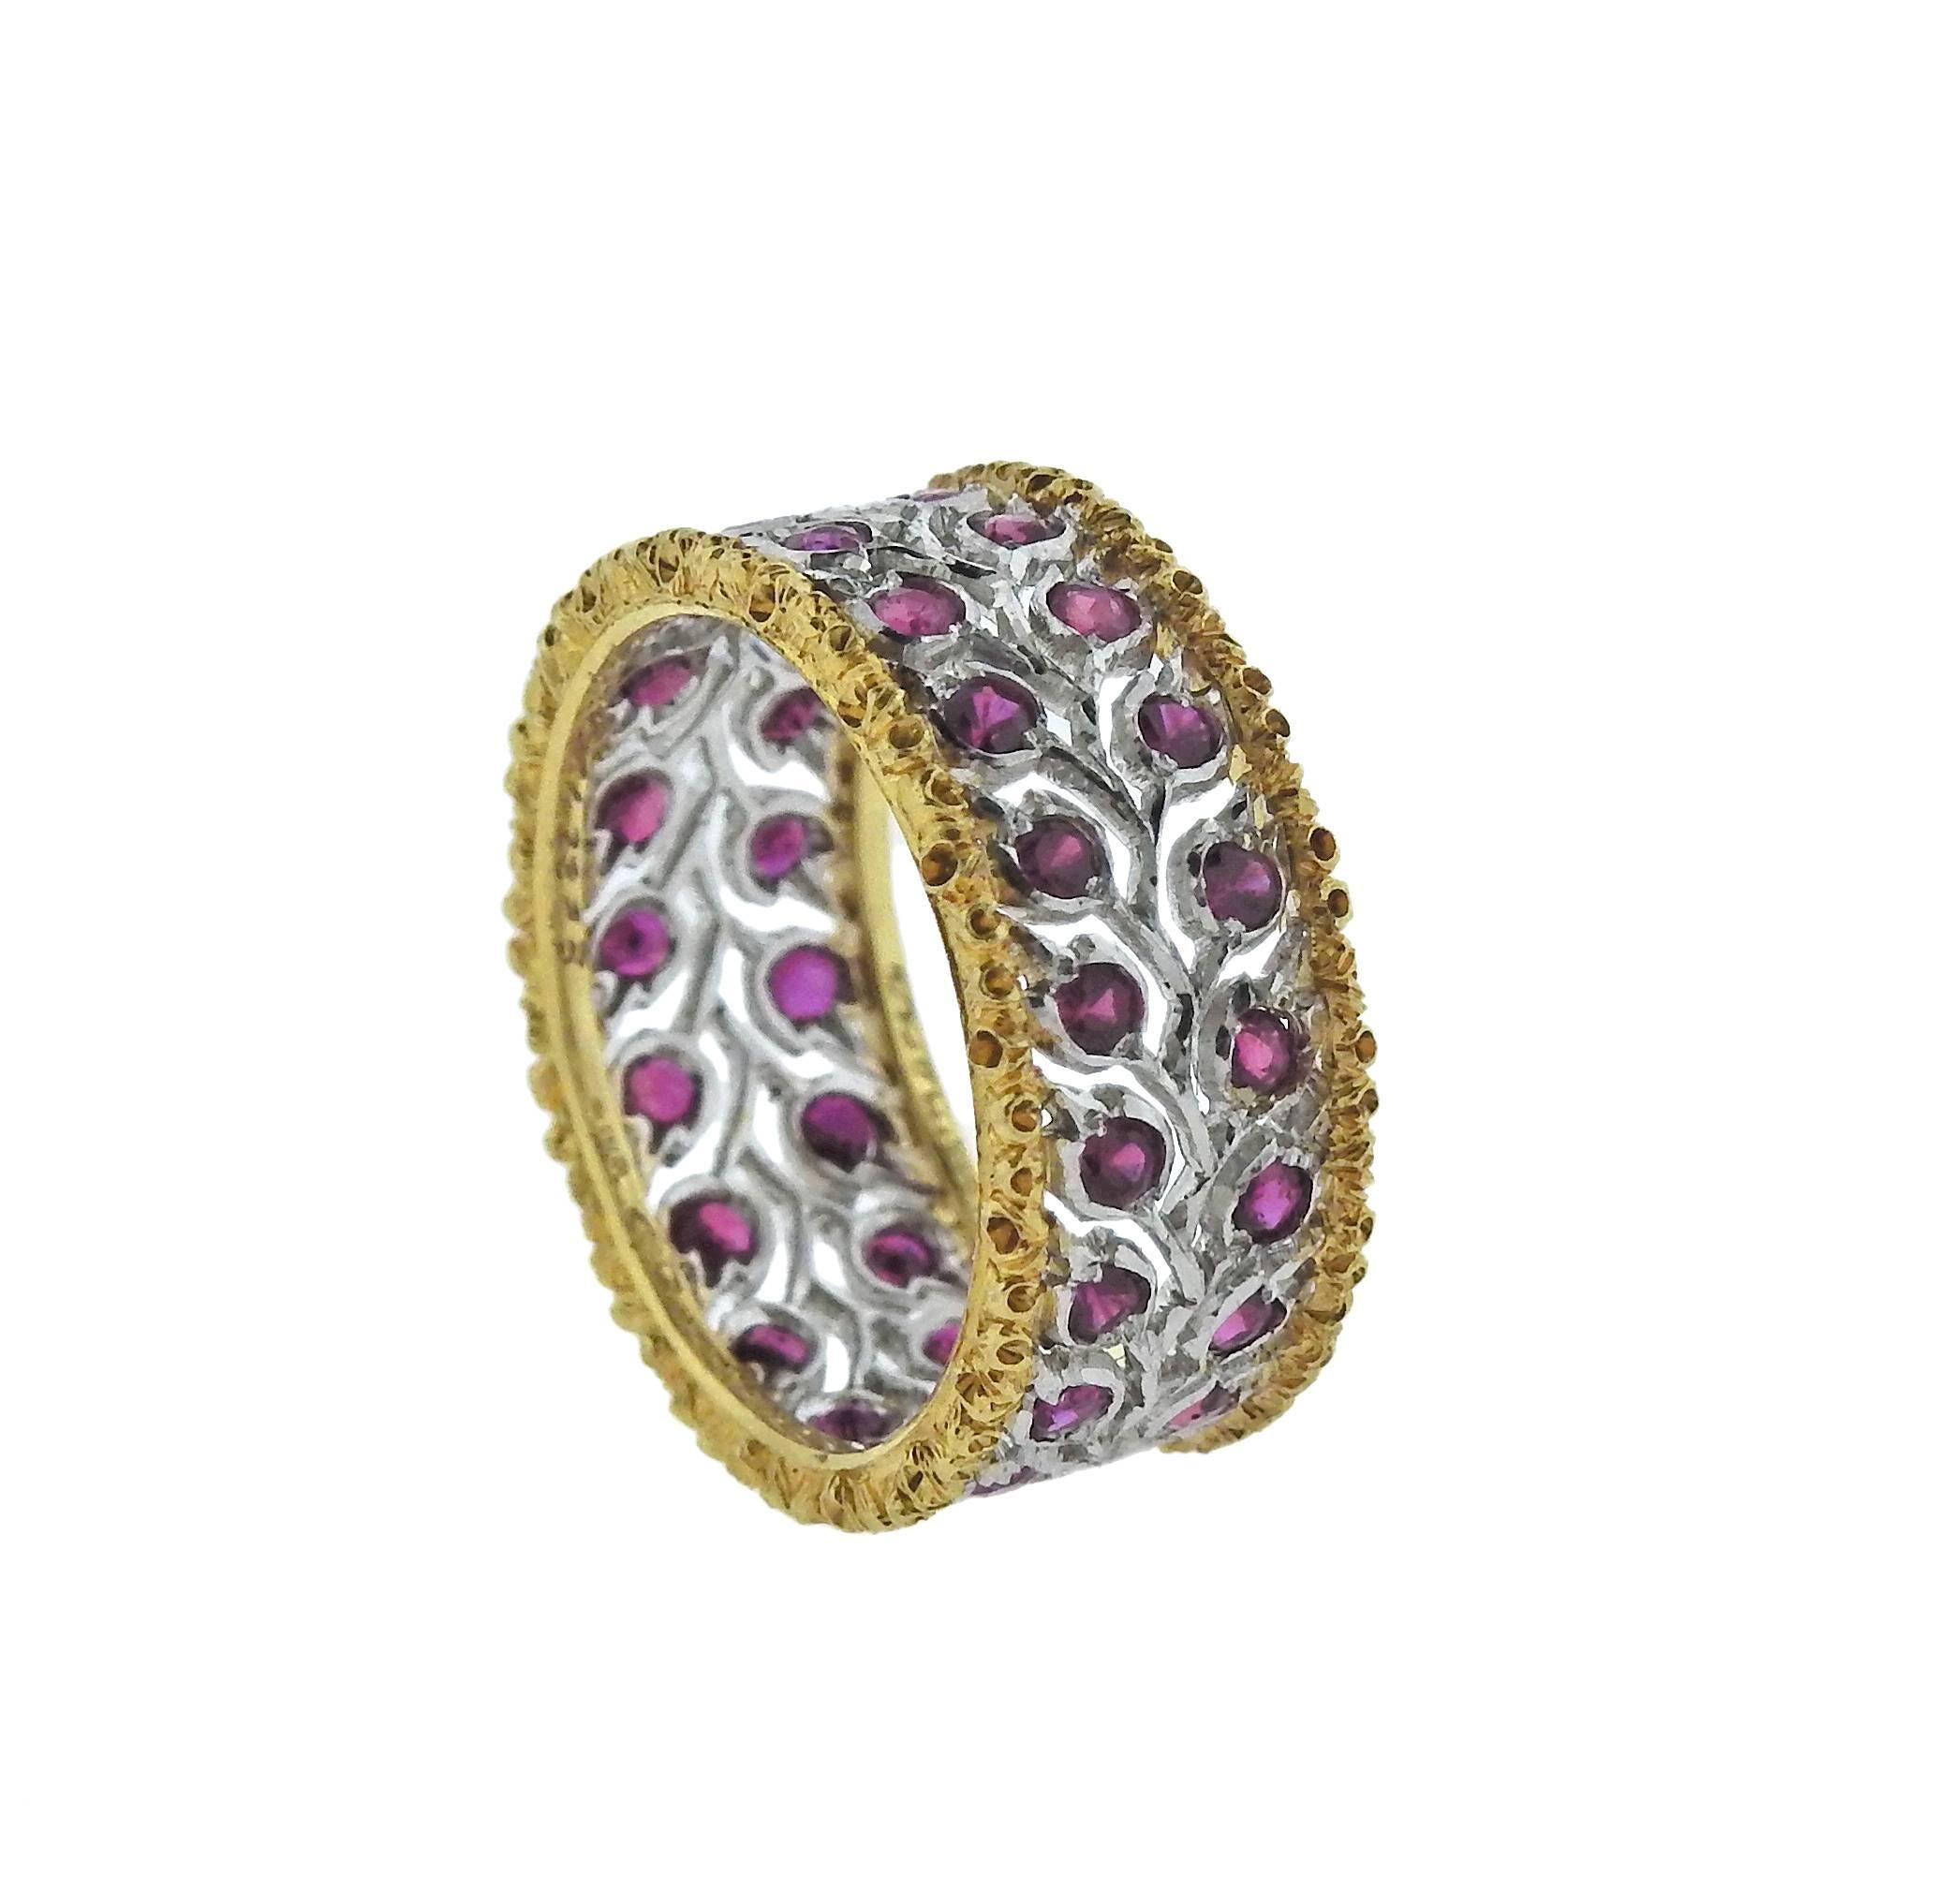  18k gold band ring, crafted by Buccellati, set with rubies. Retail $11800. Ring size - 6, ring is 8.6mm wide, weighs 4.6 grams. Marked: Italy, N2873, 750,Buccellati . 